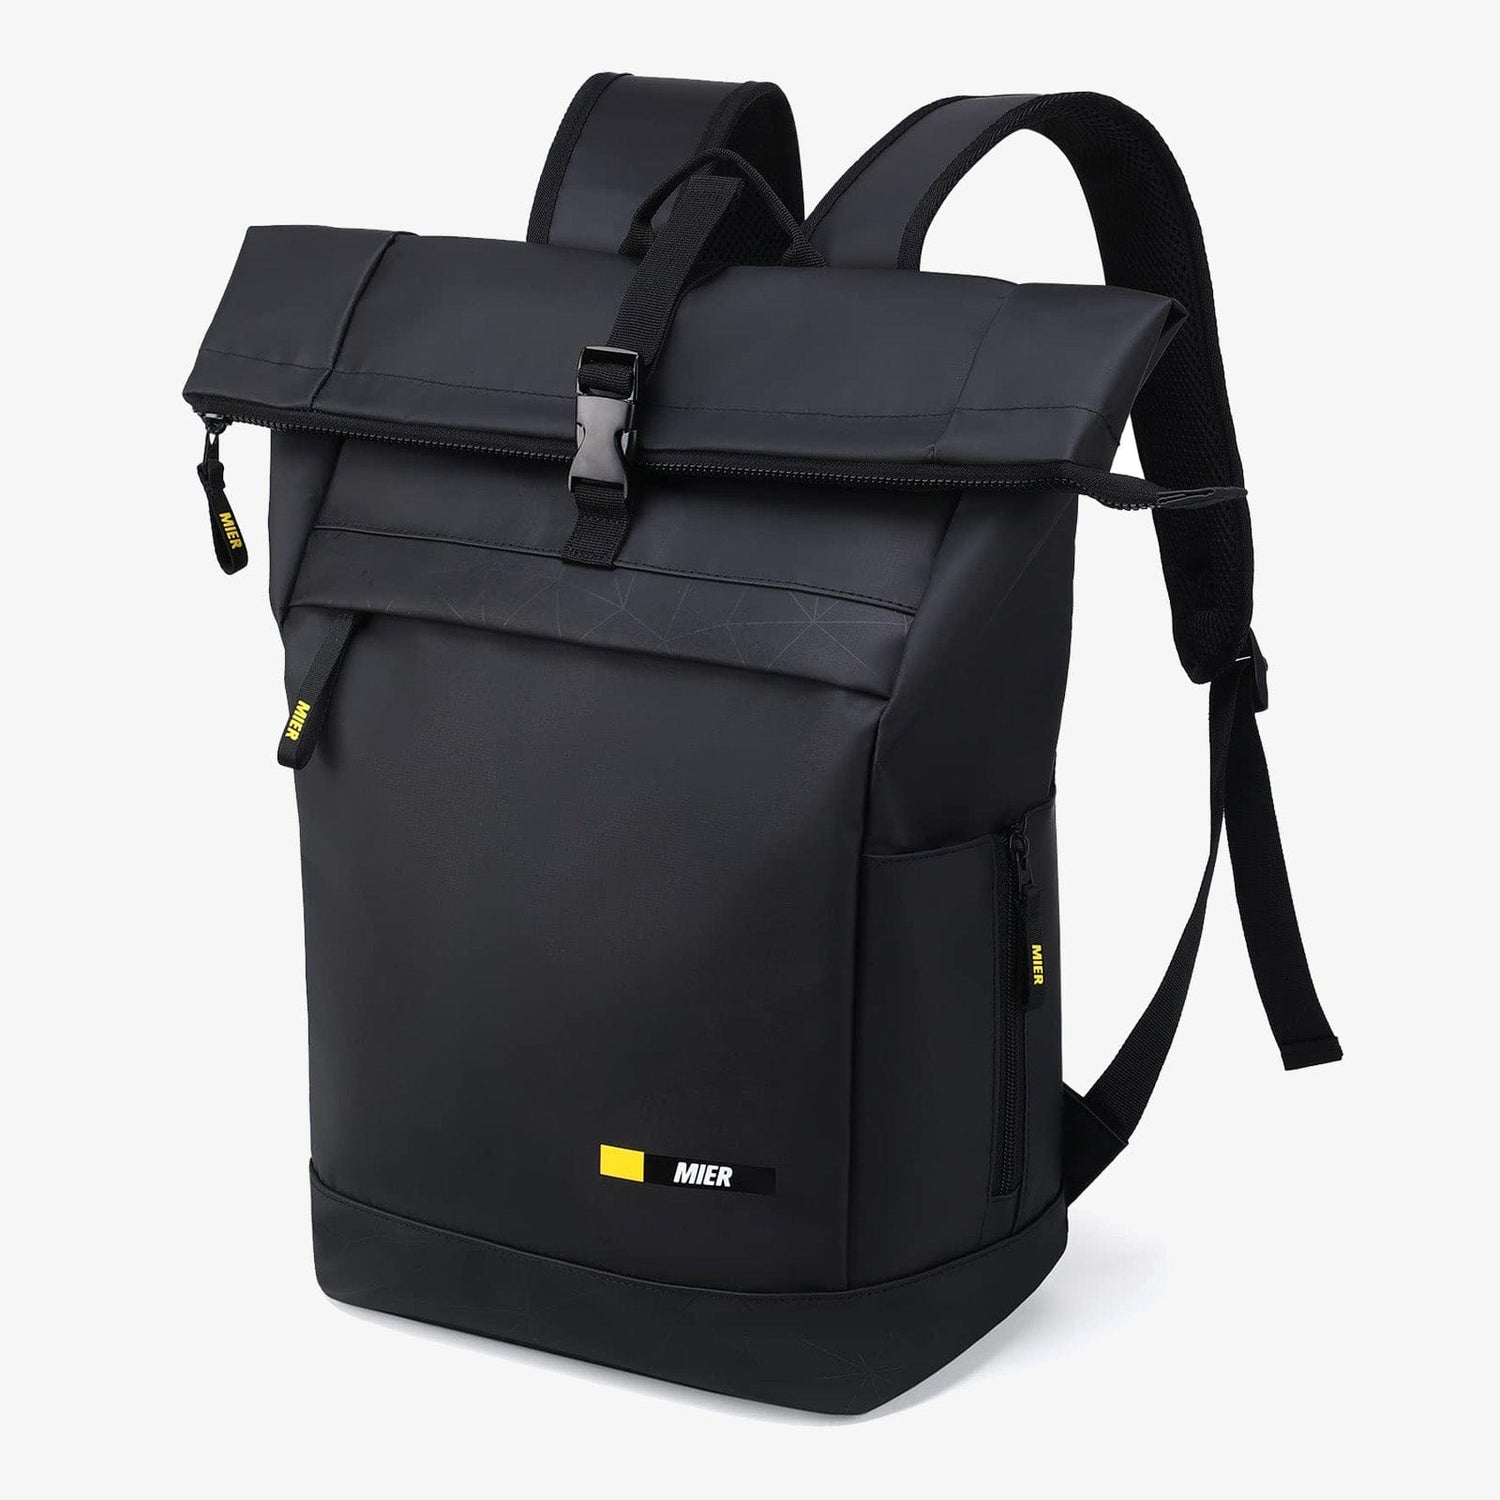 Roll-top Travel Backpack with Laptop Compartment Backpack Bag Black MIER